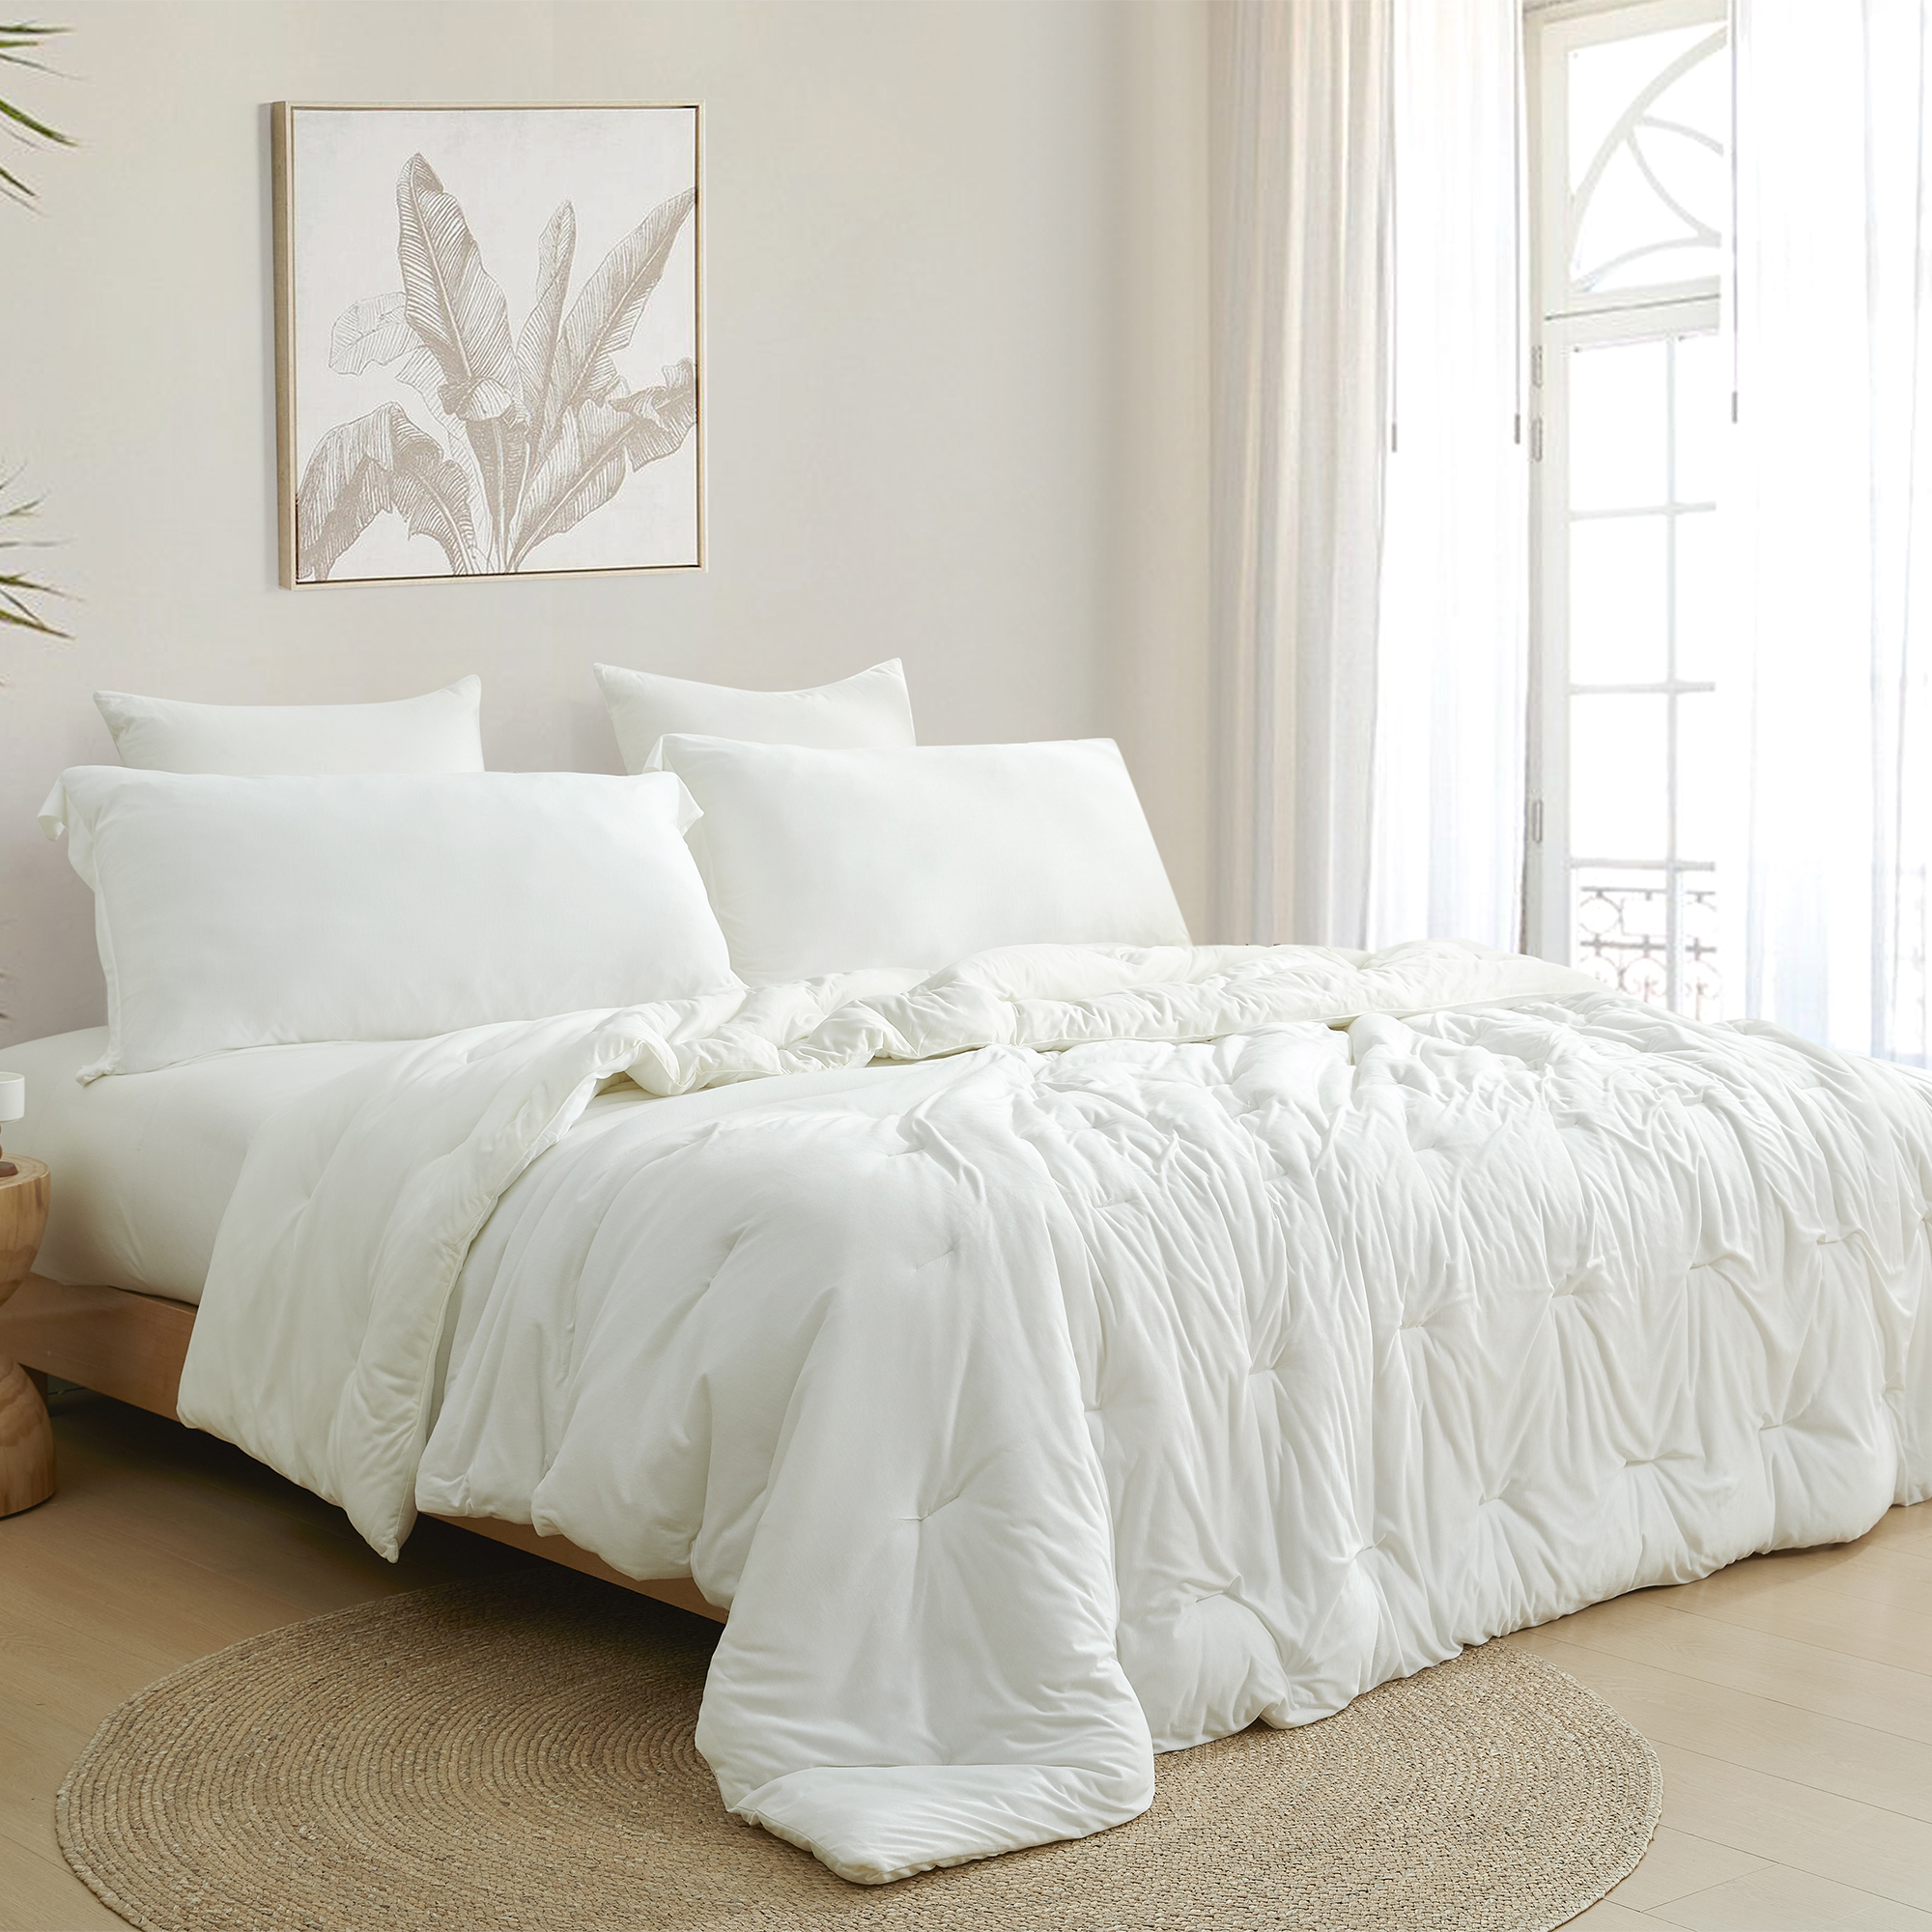 Cover Me Cold - Coma Inducer® Oversized Comforter - Frigid Cloud